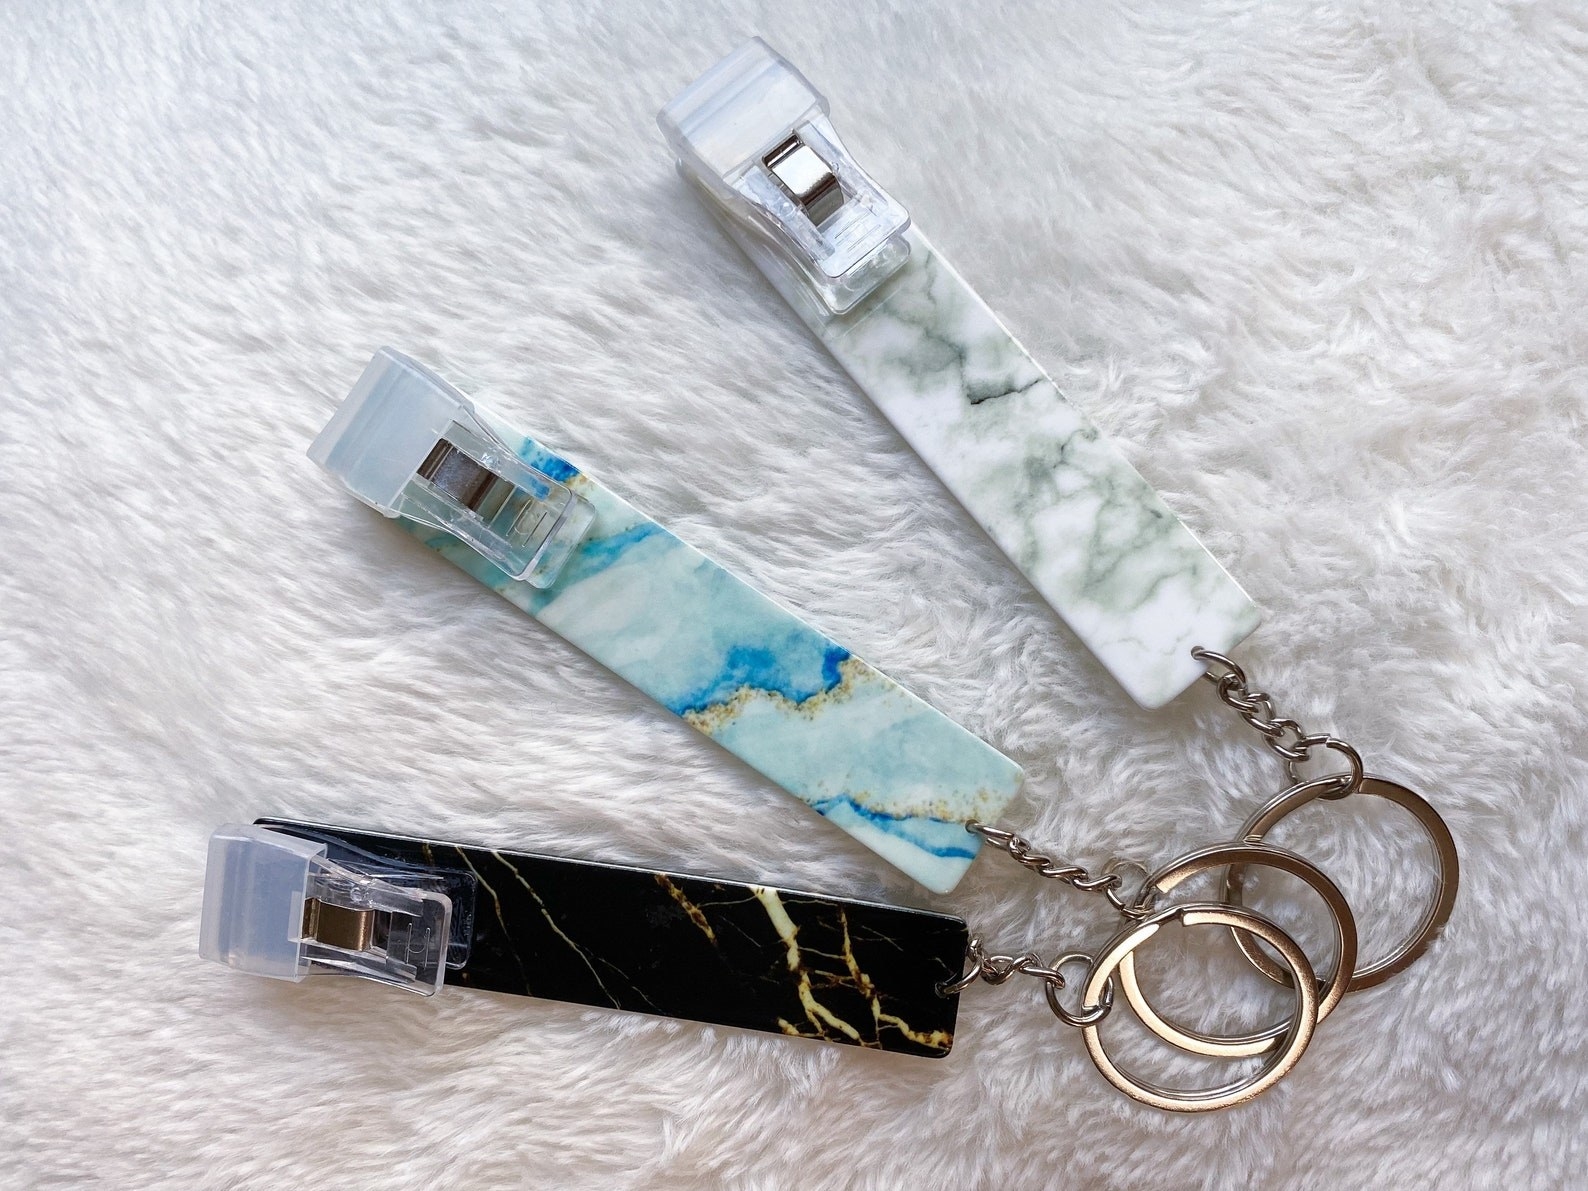 three long rectangular card grippers on keychains and in different metallic colors